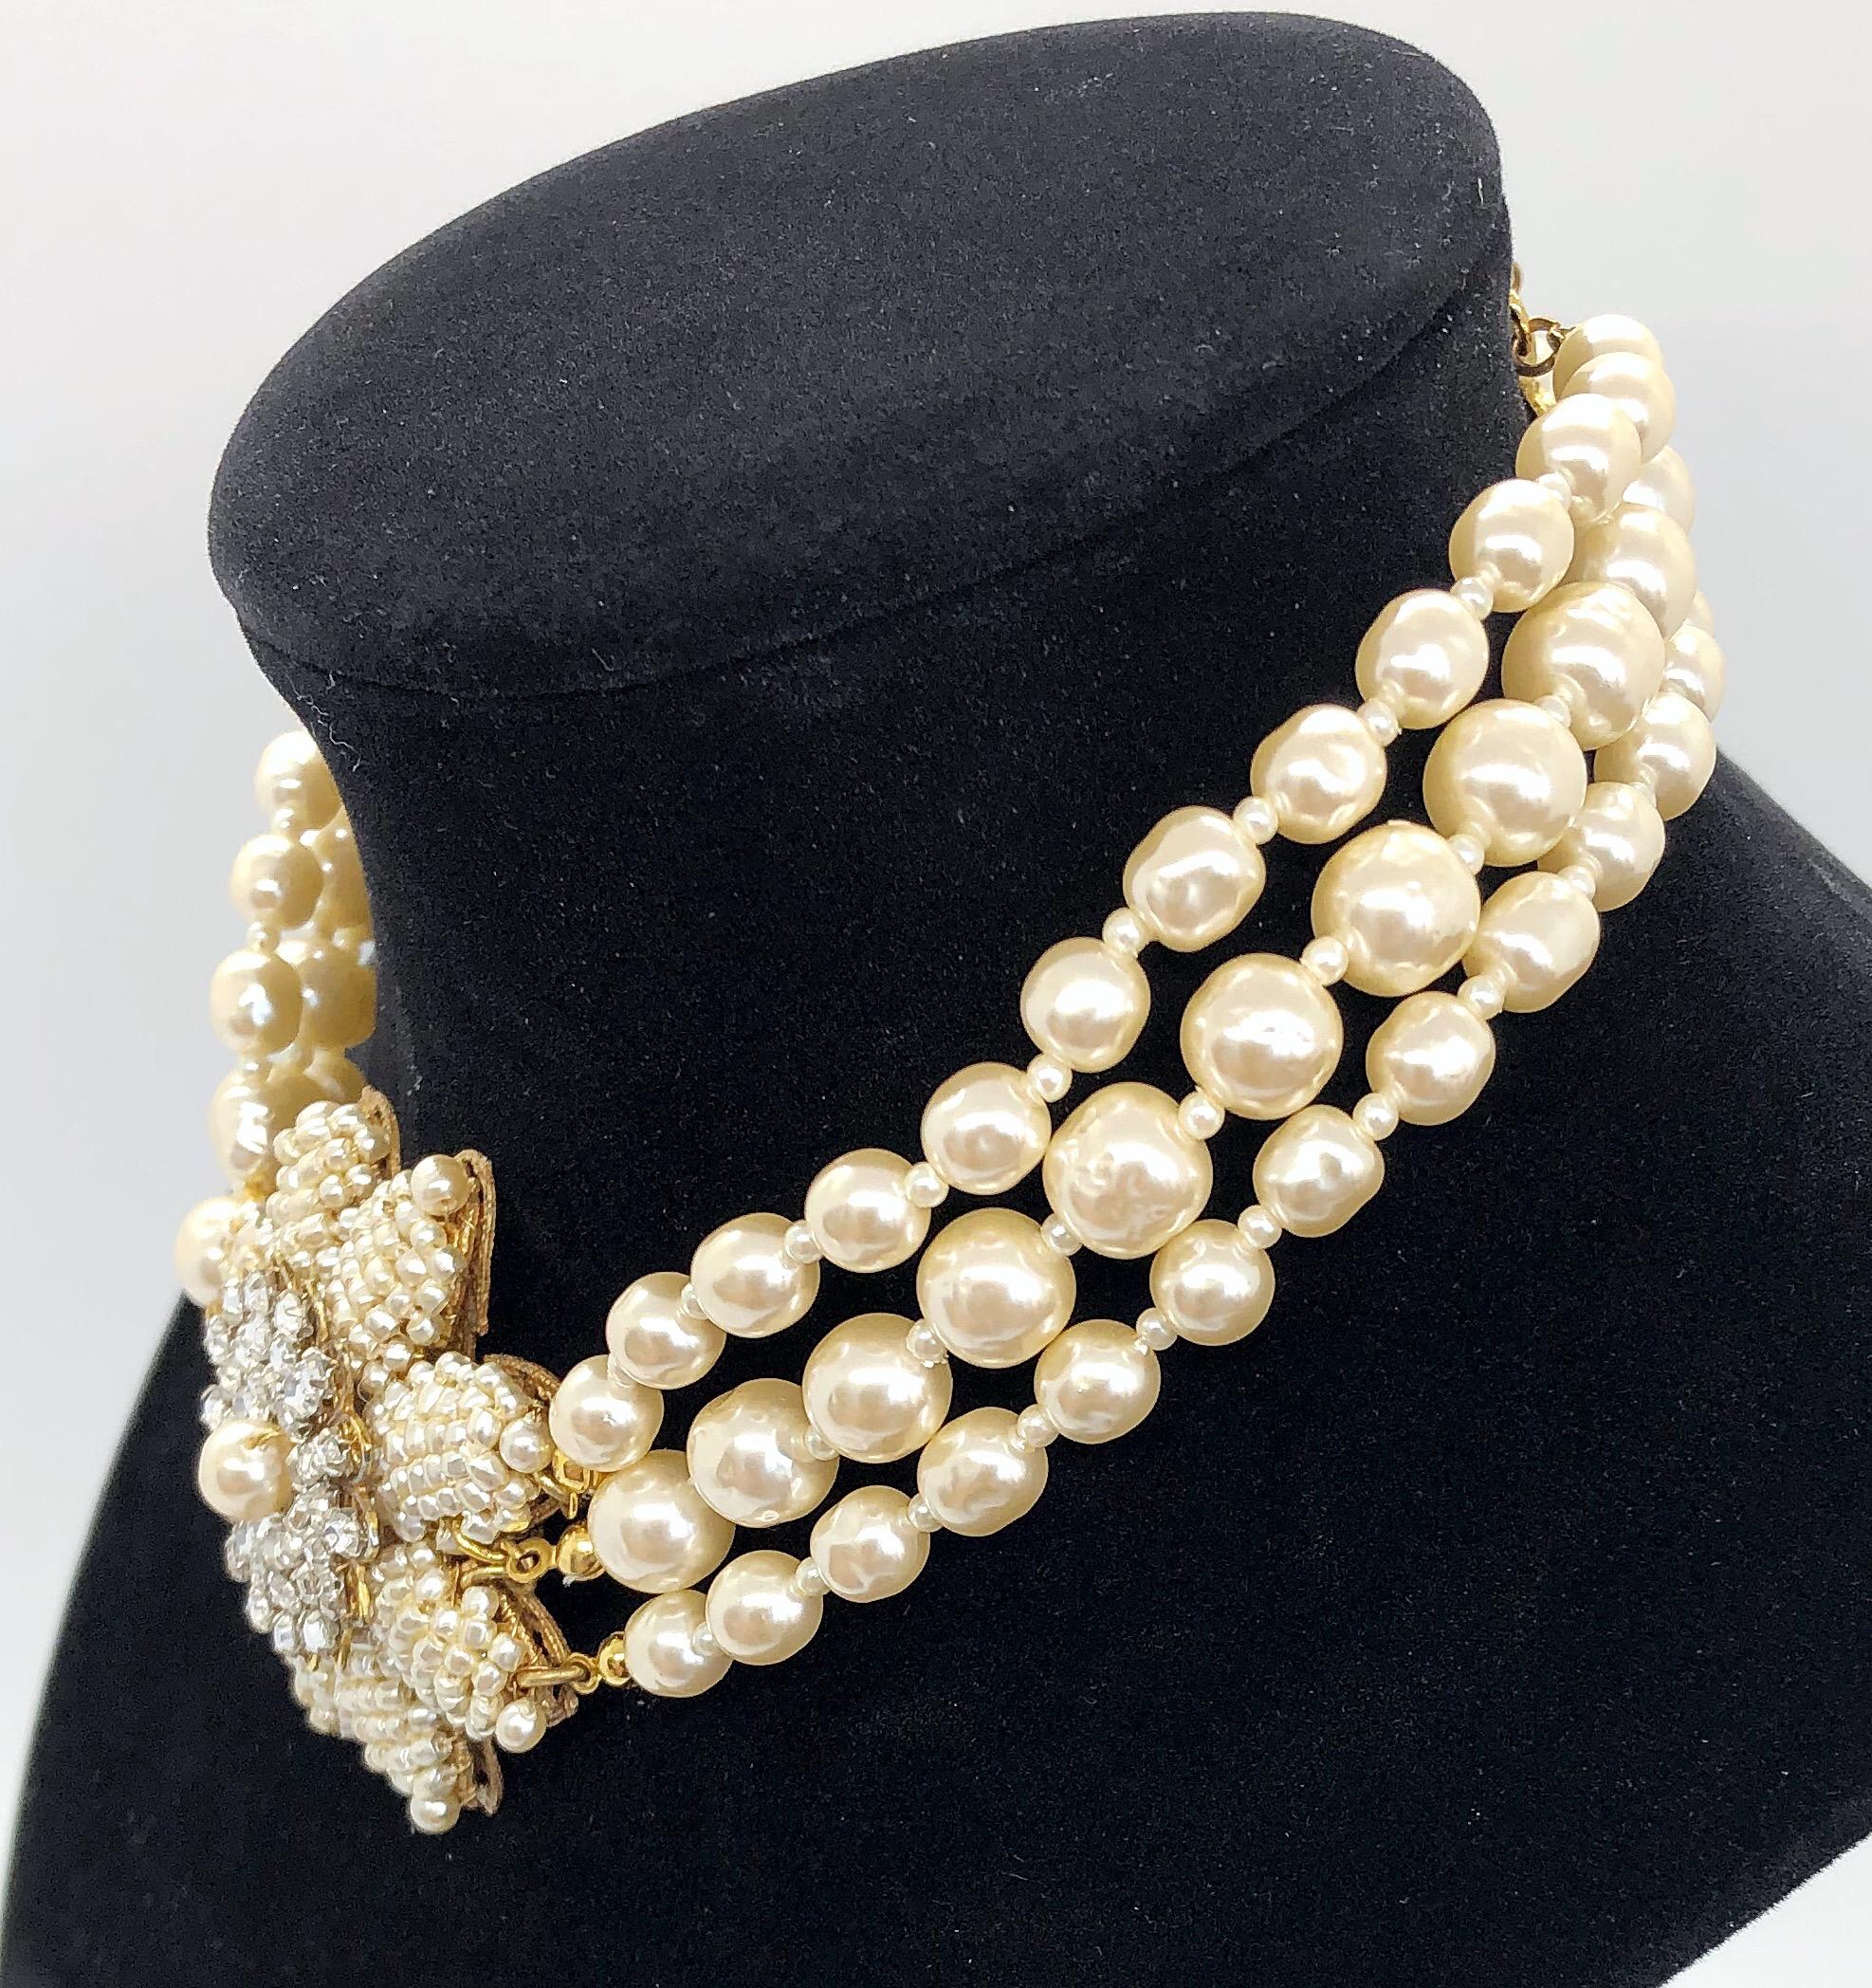 Women's Miriam Haskell 1950s Triple Strand Freshwater Pearl Rhinestone Choker Necklace For Sale